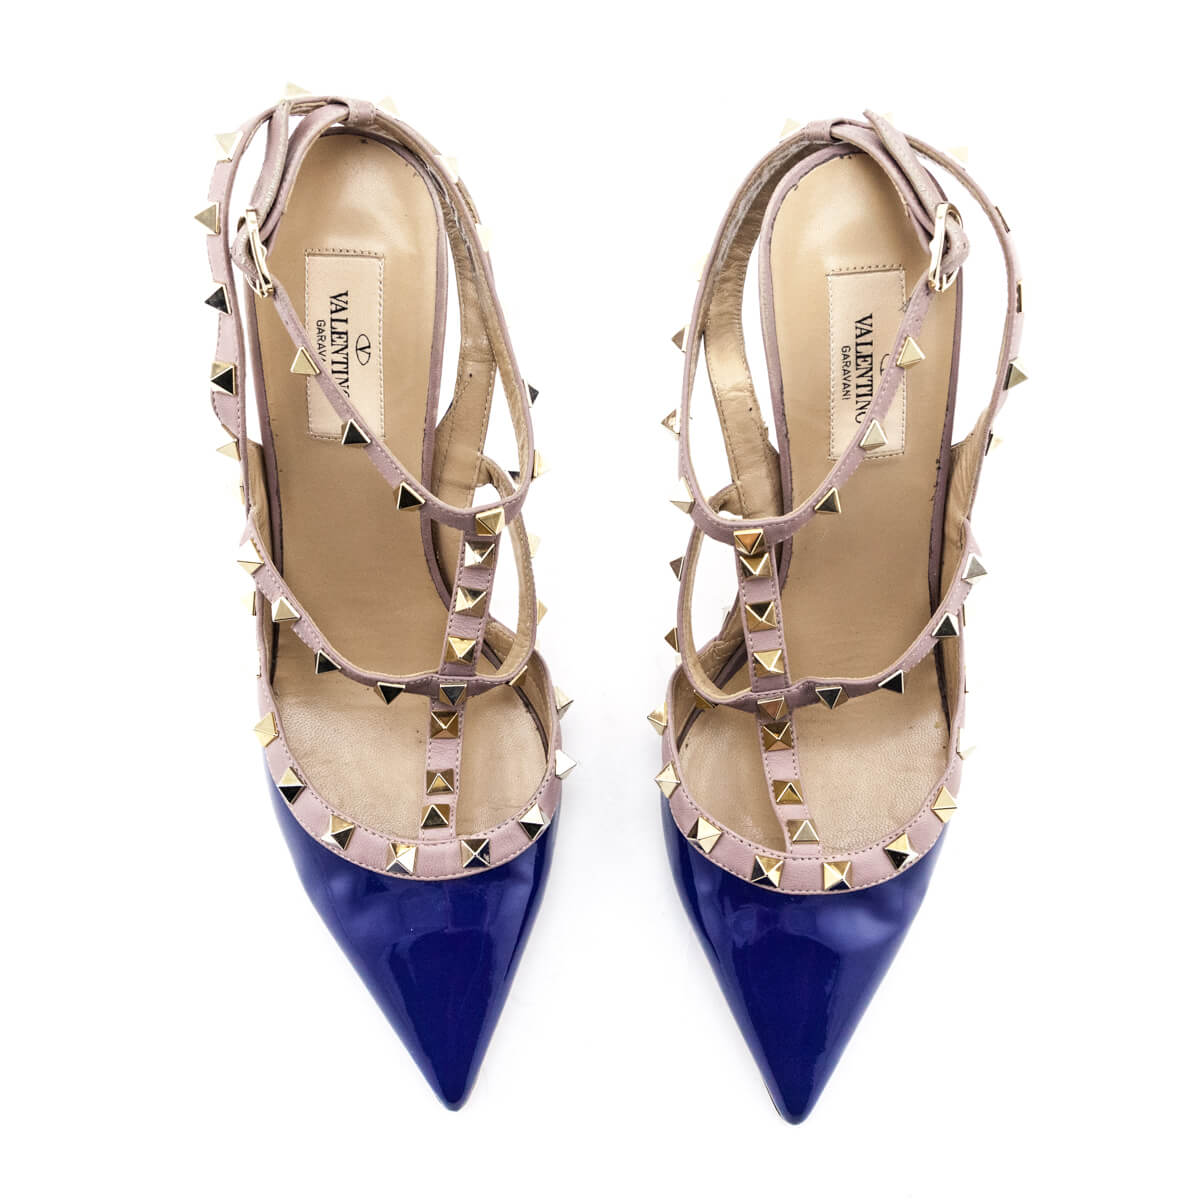 Valentino Blue Patent Rockstud Pumps Size US 10 | IT 40 - Love that Bag etc - Preowned Authentic Designer Handbags & Preloved Fashions